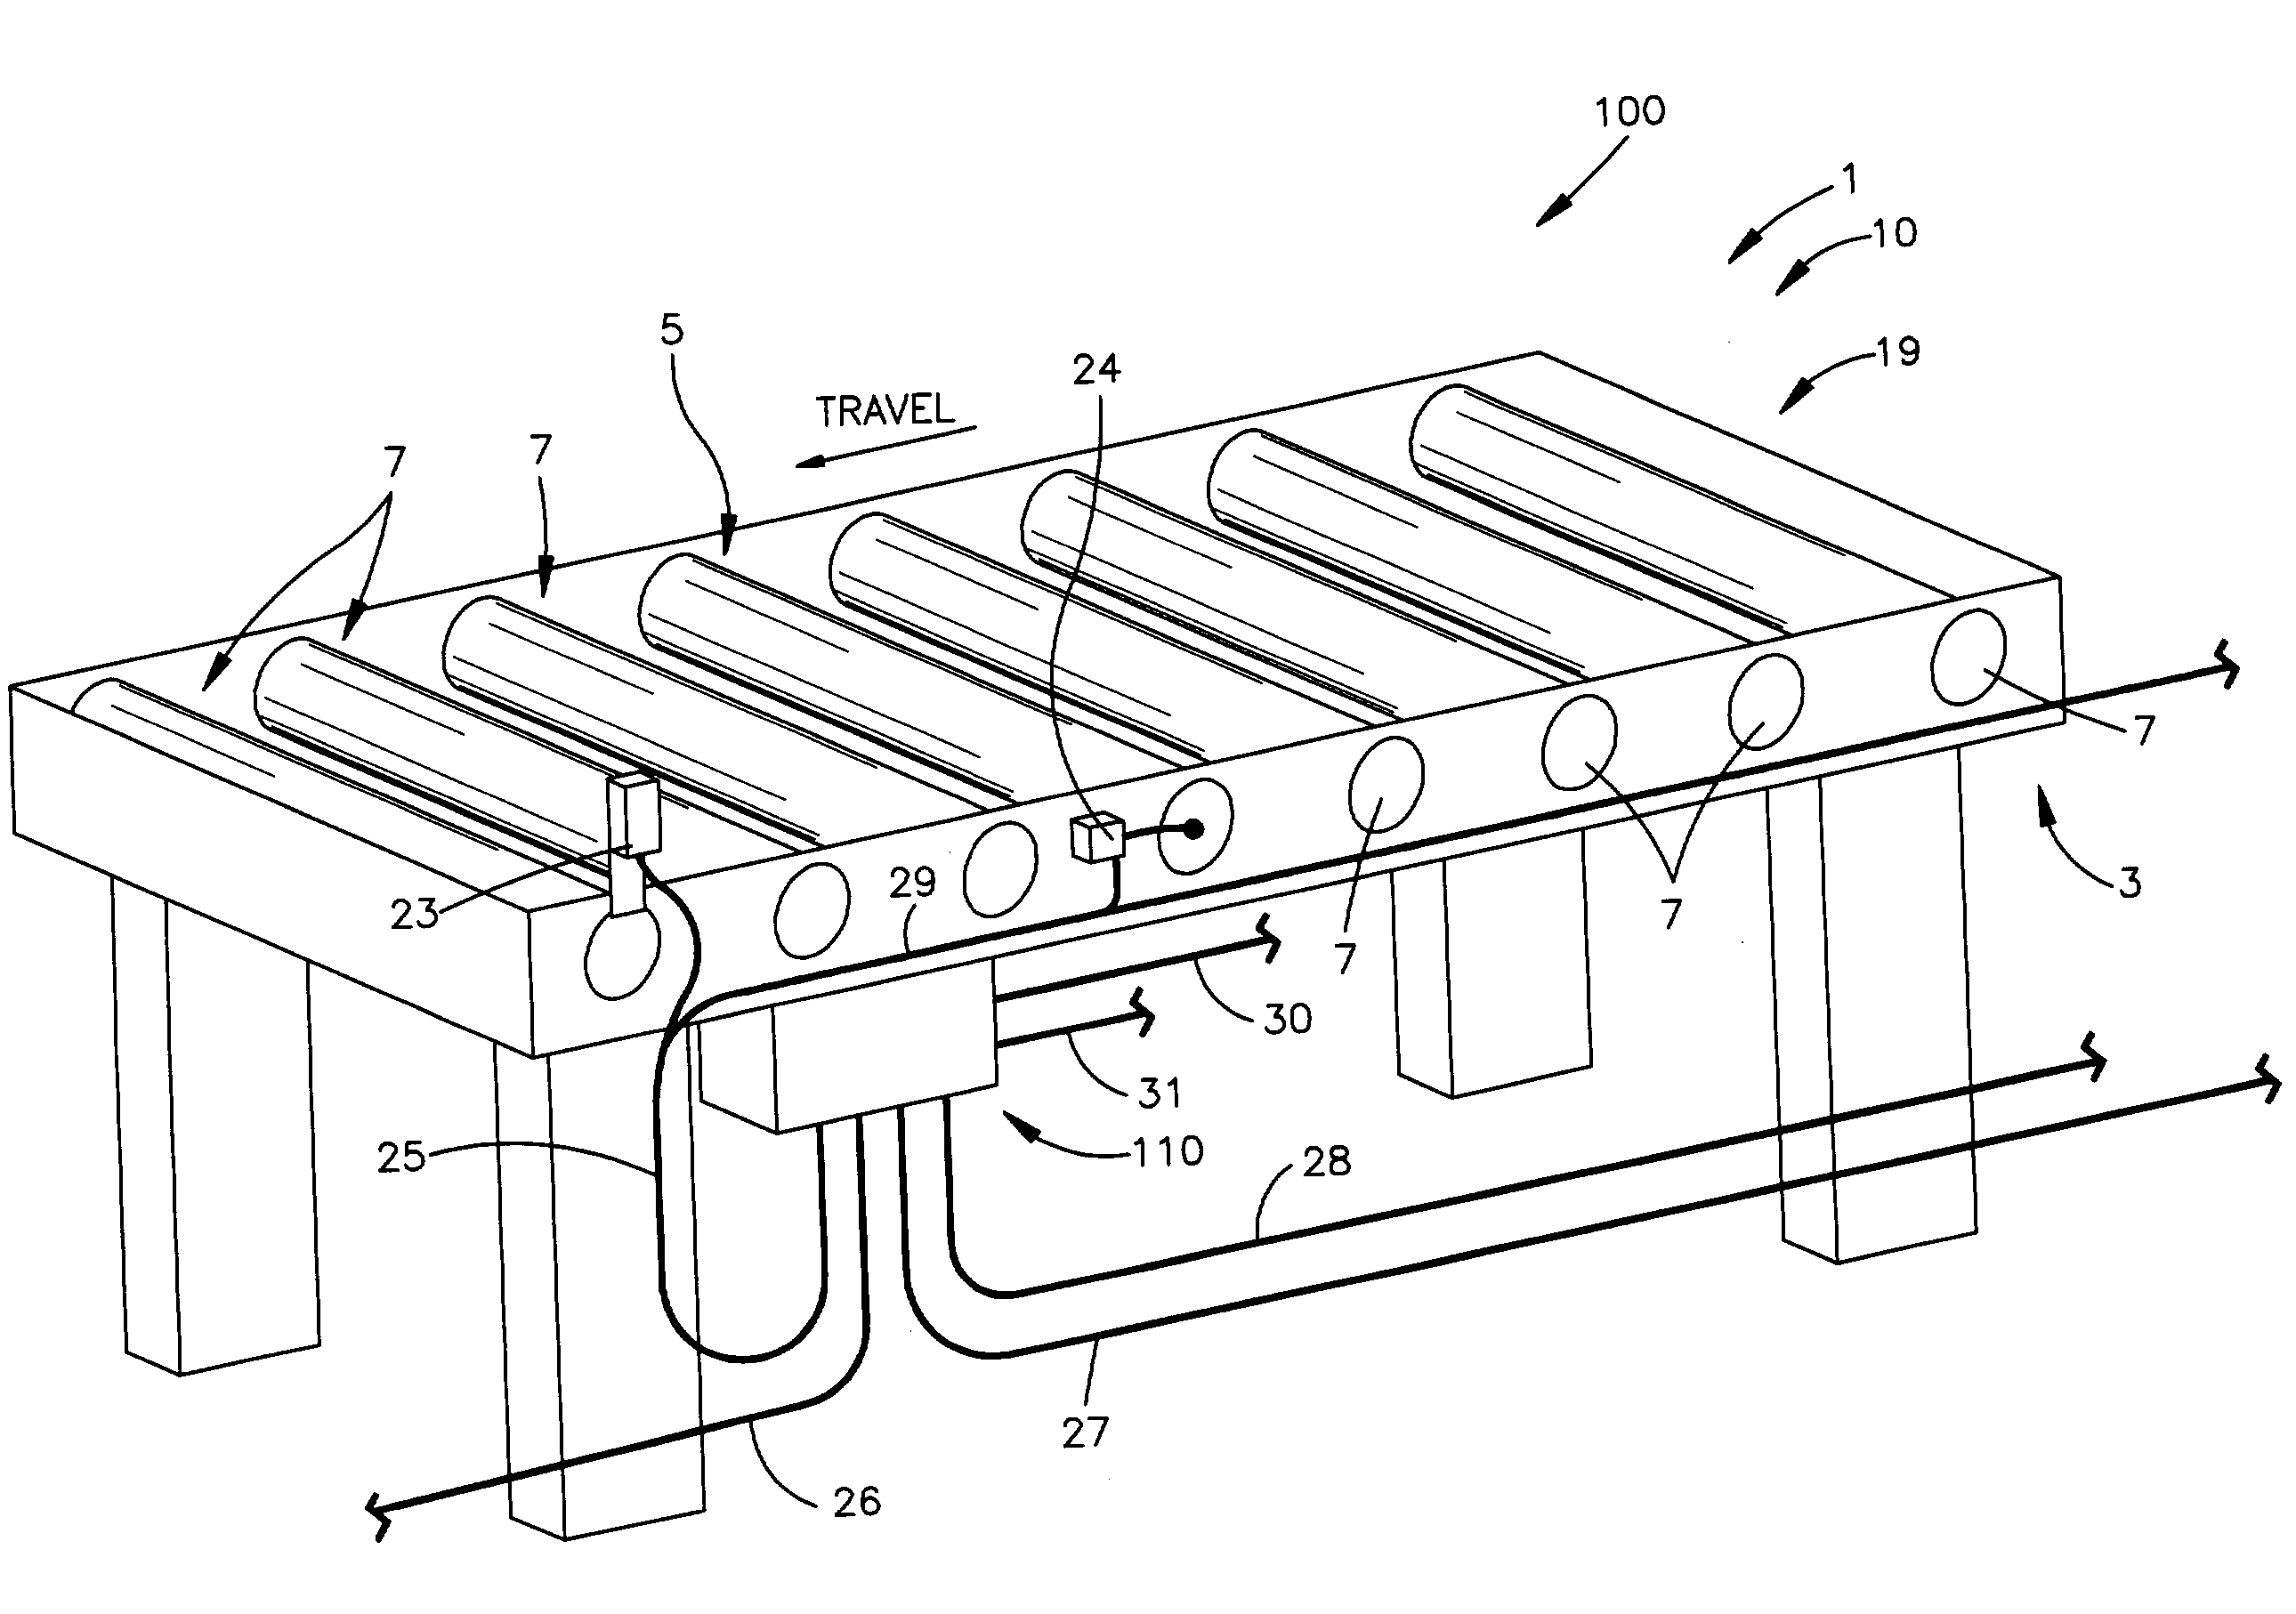 Control and power distribution system for a conveyor